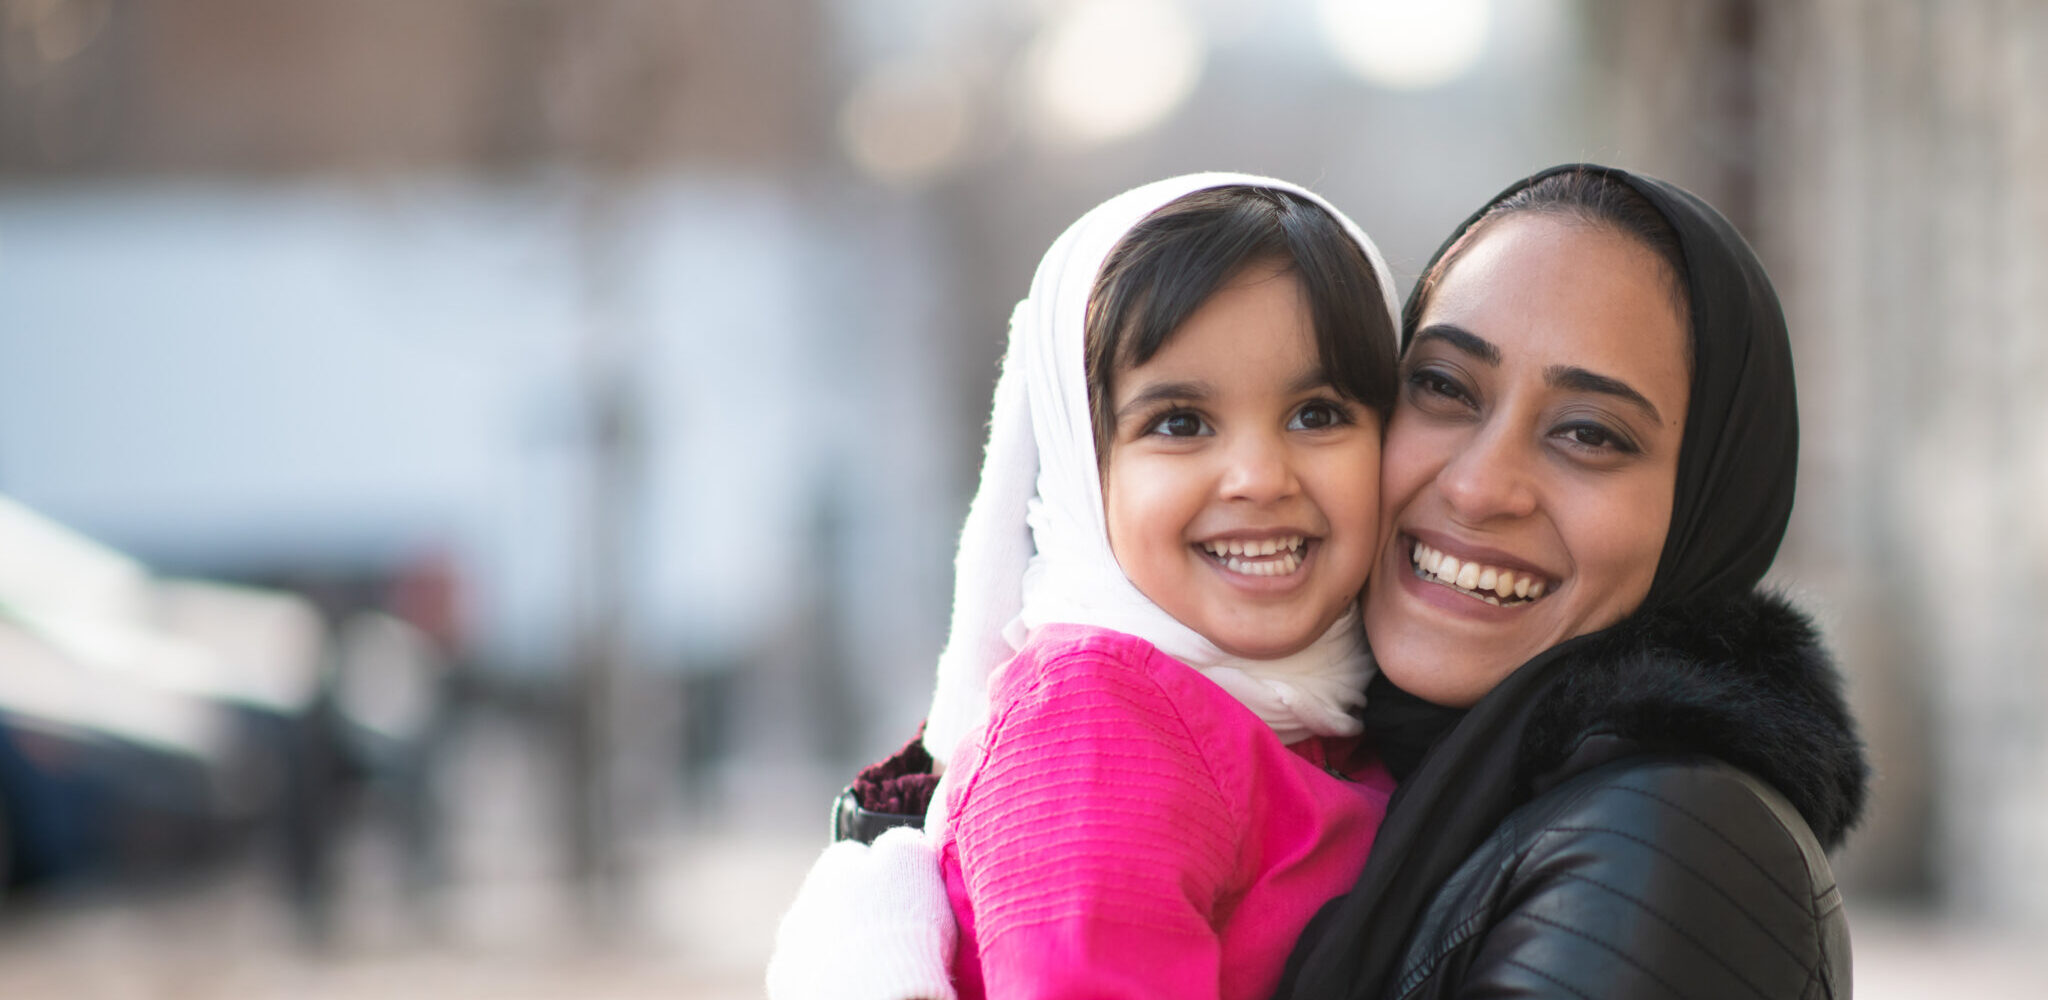 A beautiful young Muslim mother holds her daughter in a loving embrace. They are both smiling and facing forward while outside one day during the winter season.